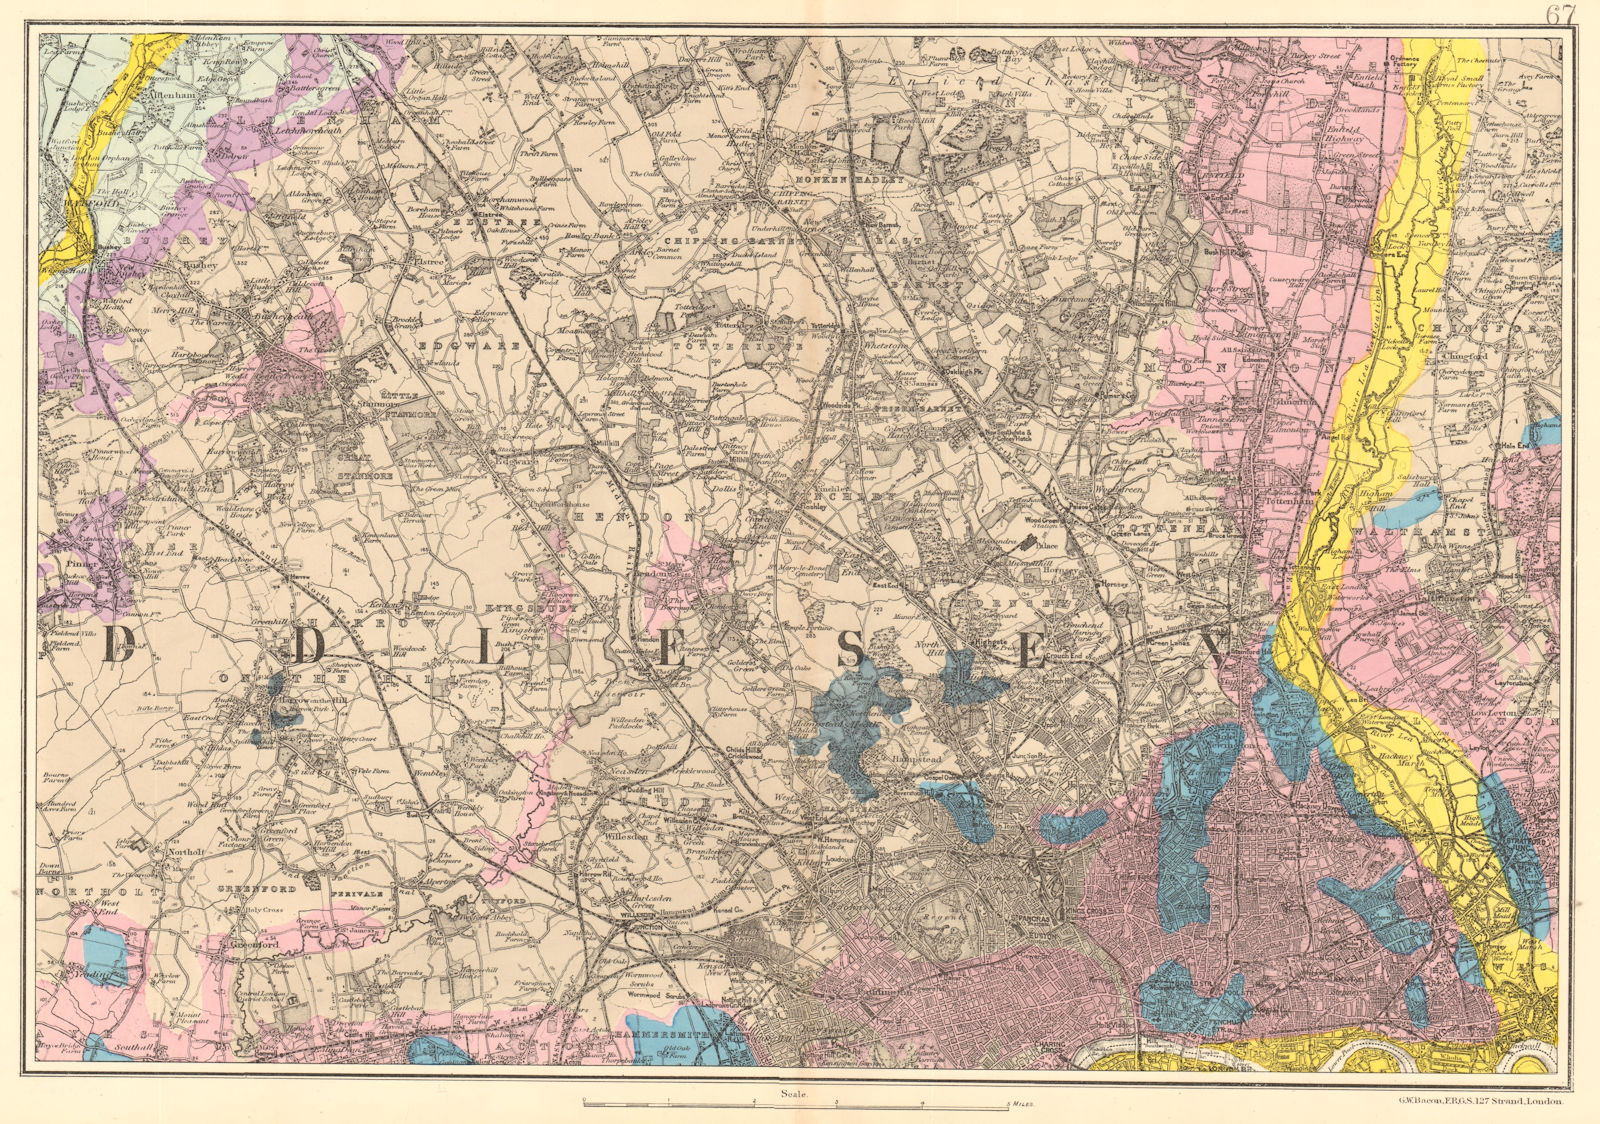 NW LONDON GEOLOGICAL Westminster Islington Brent Ealing Camden.BACON 1903 map